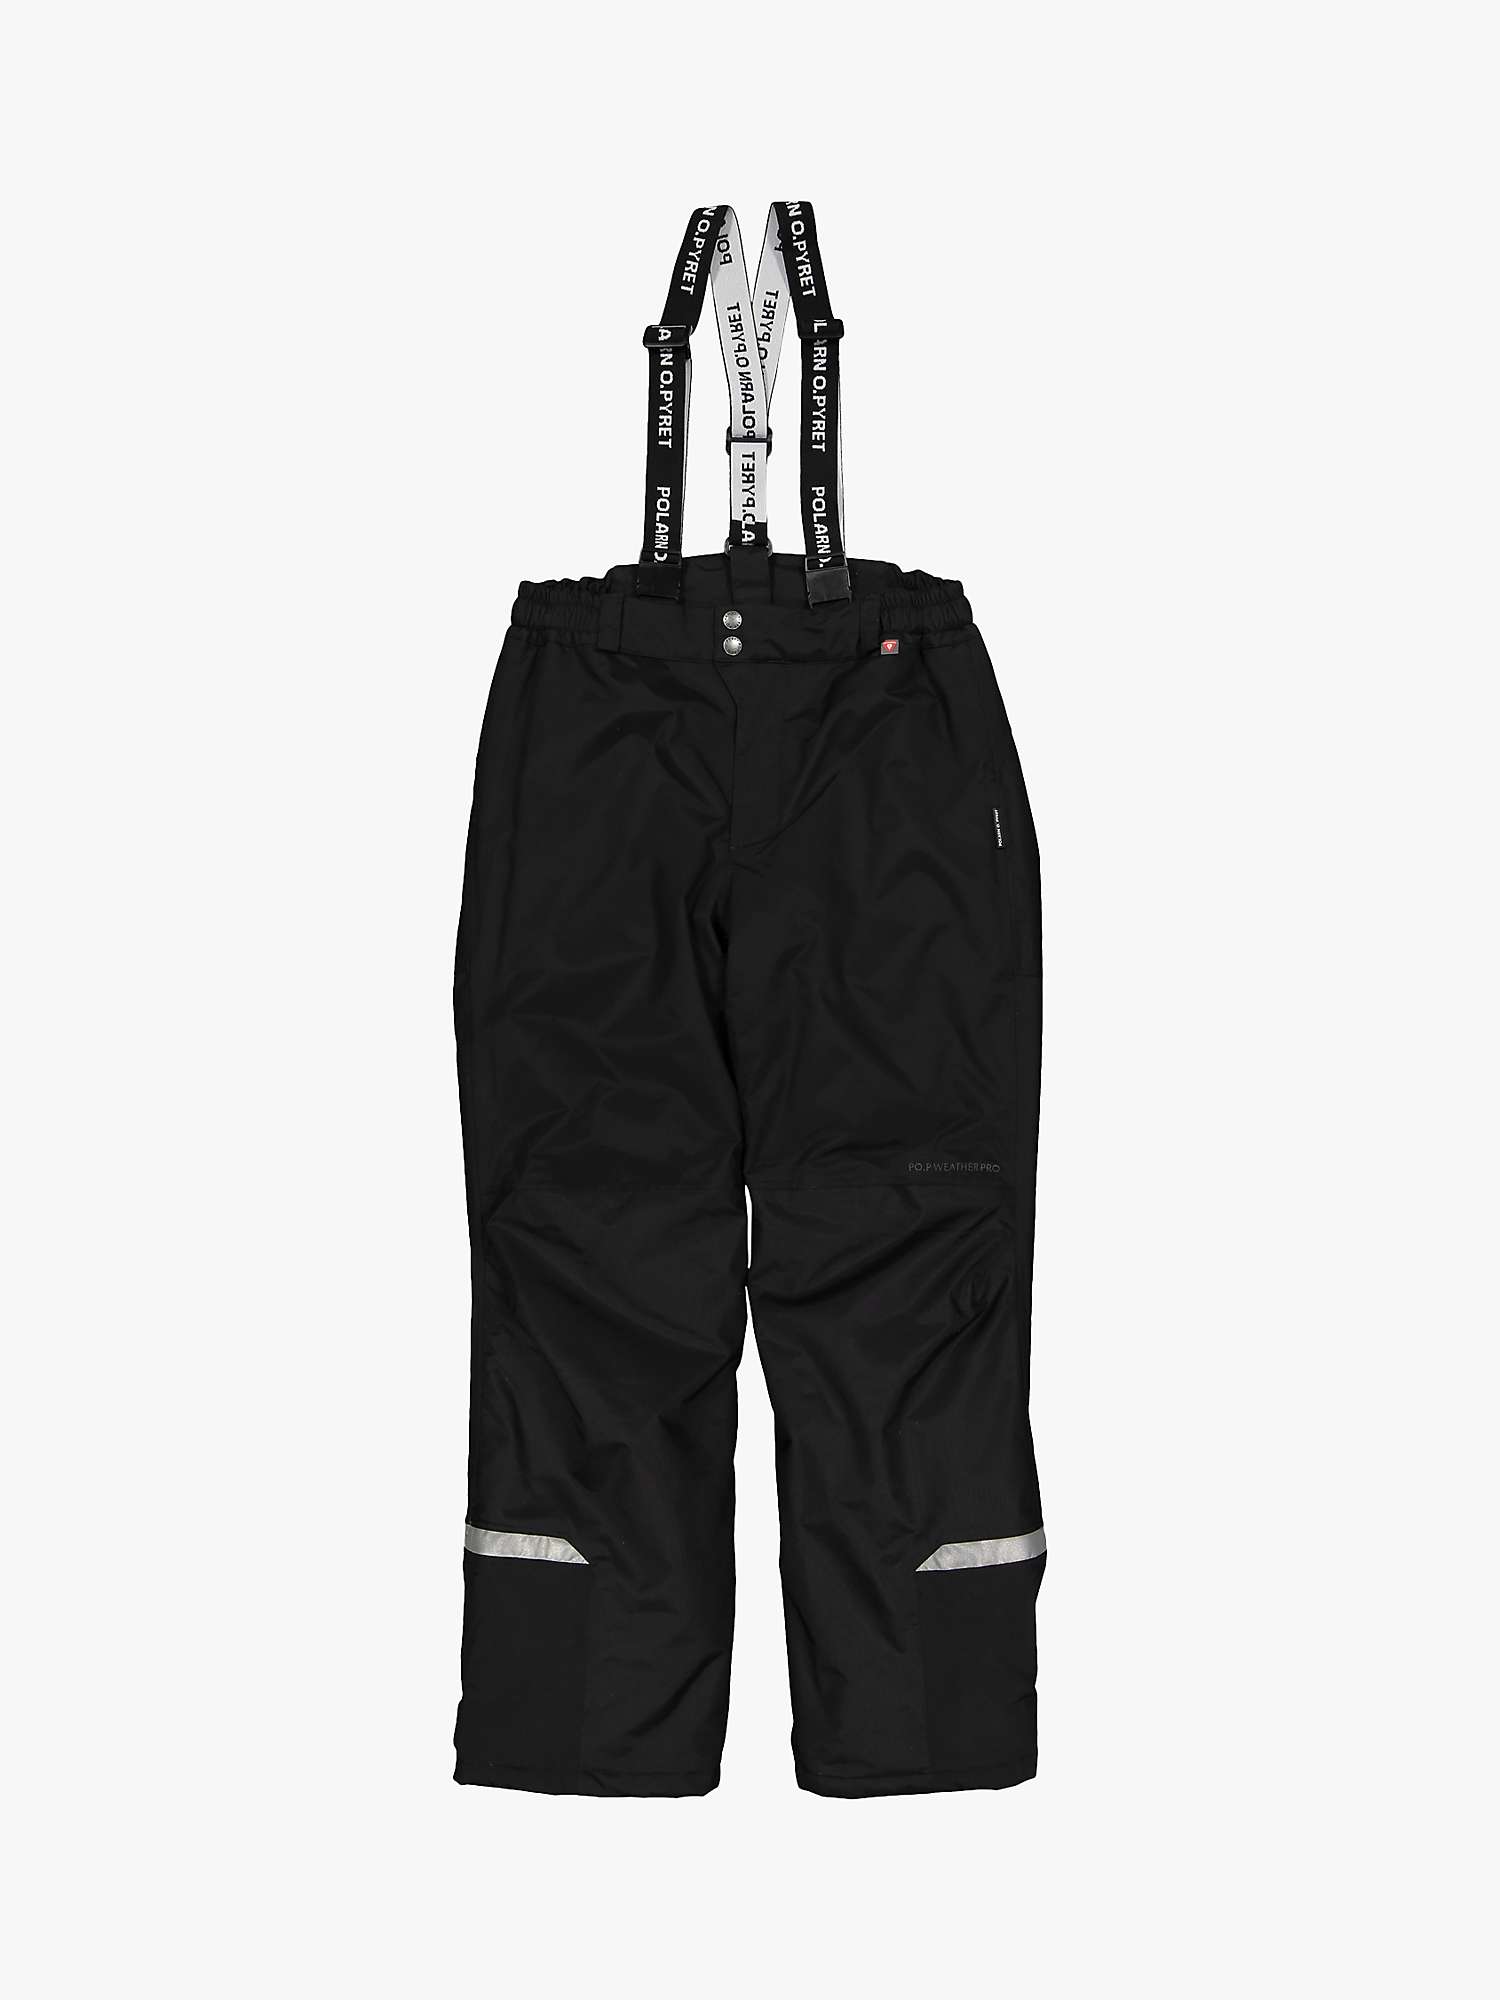 Buy Polarn O. Pyret Kids' Waterproof Shell Trousers Online at johnlewis.com